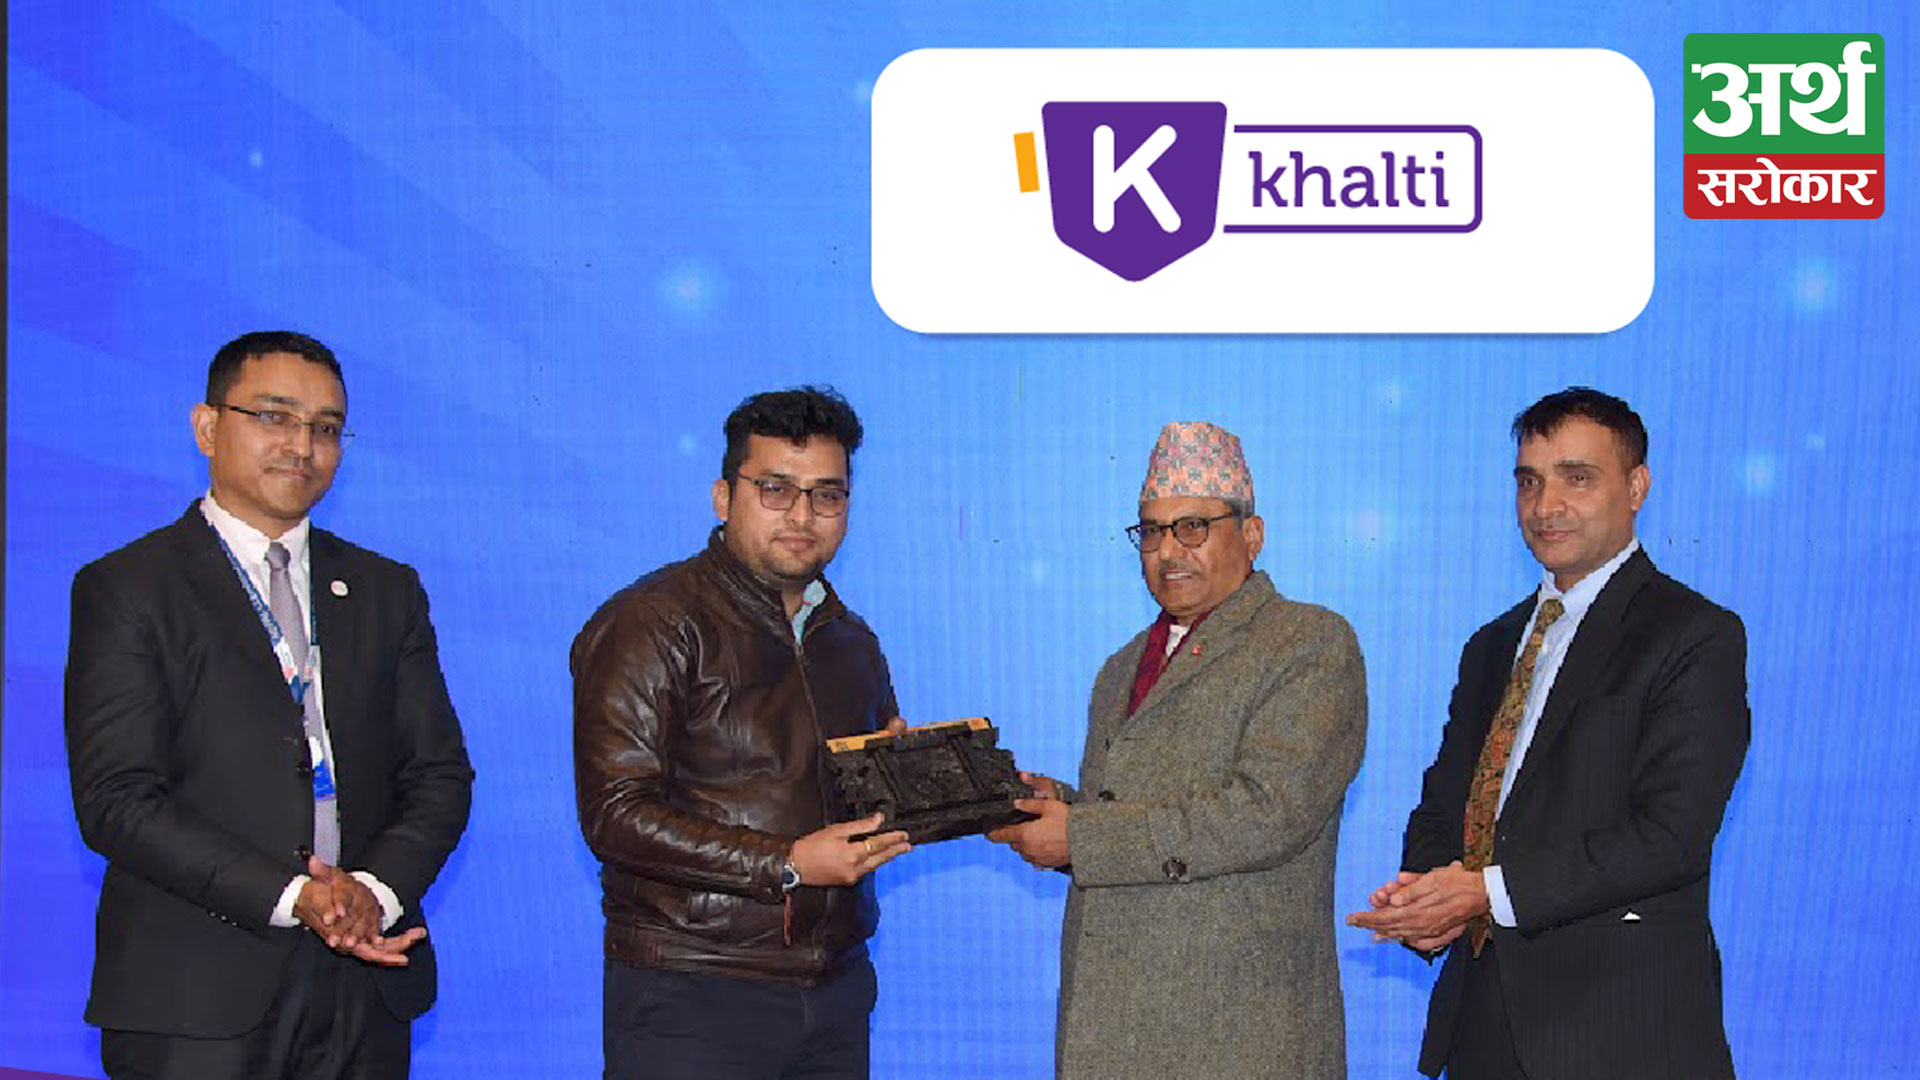 Khalti recognized for processing the highest number of digital transactions in the Payment Service Provider Sector